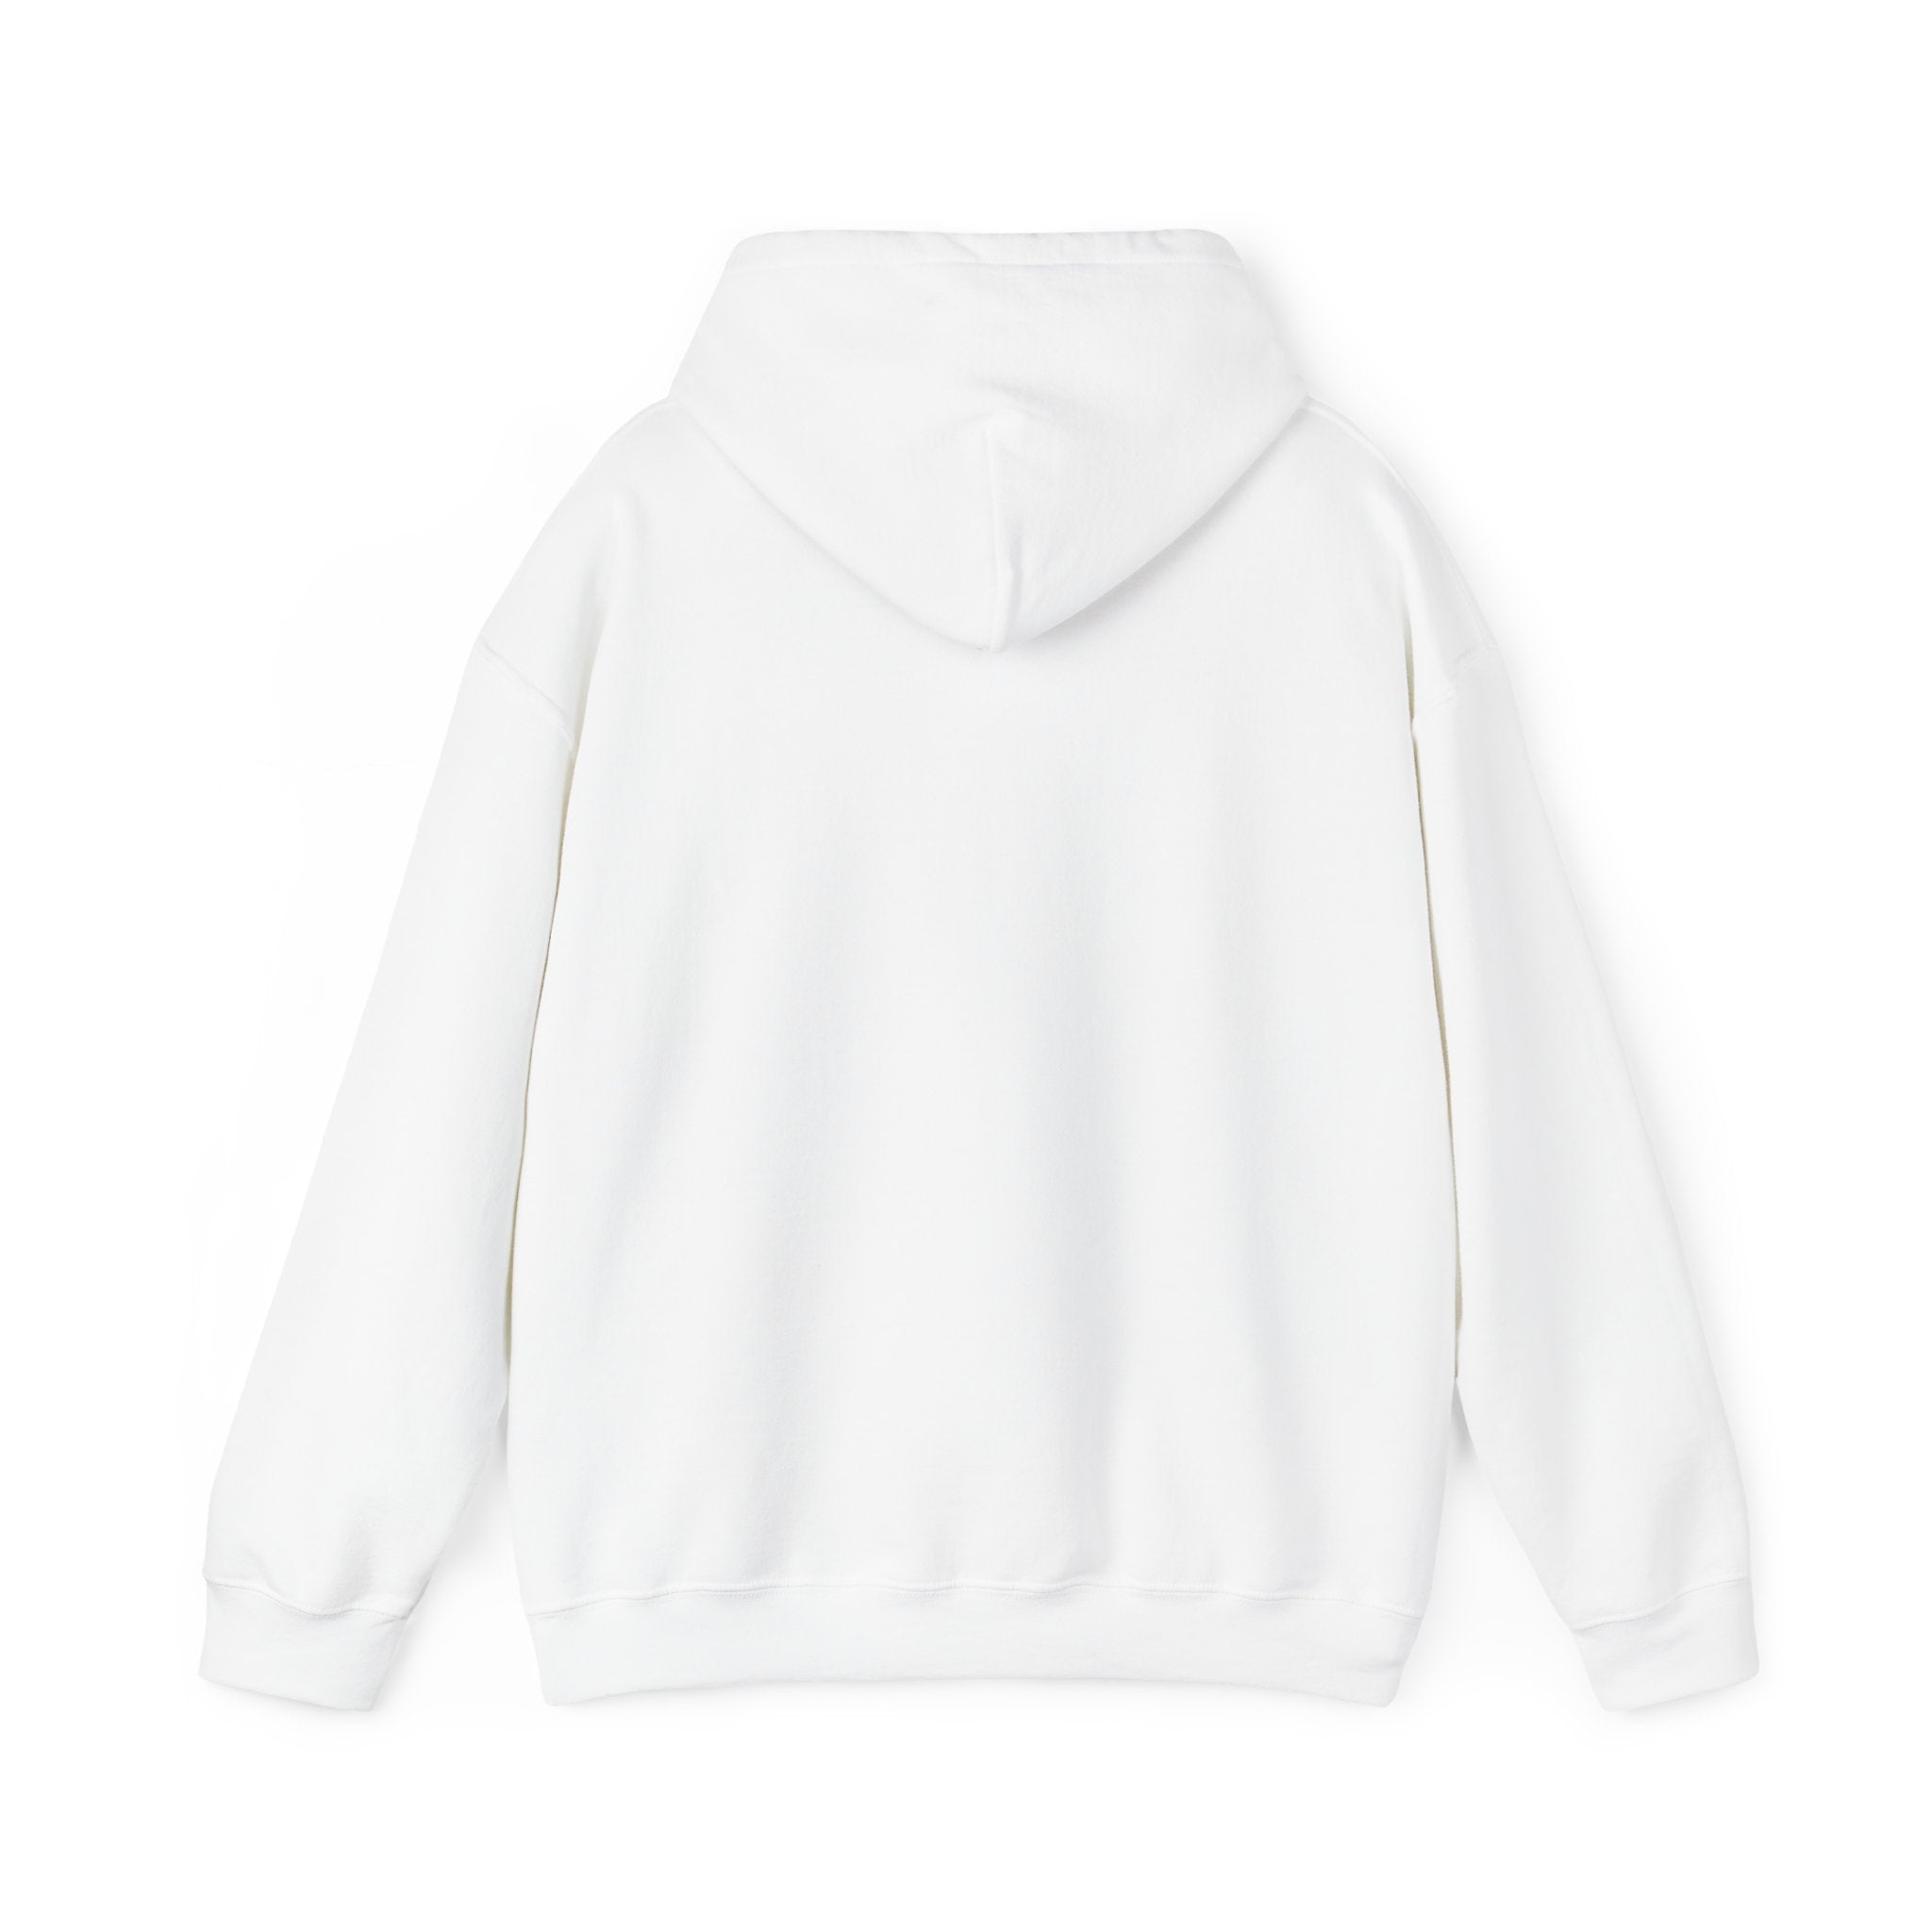 A plain white hoodie viewed from the back, featuring a hood and long sleeves, this RU - Hooded Sweatshirt offers the ultimate comfort and is the perfect blend of style.